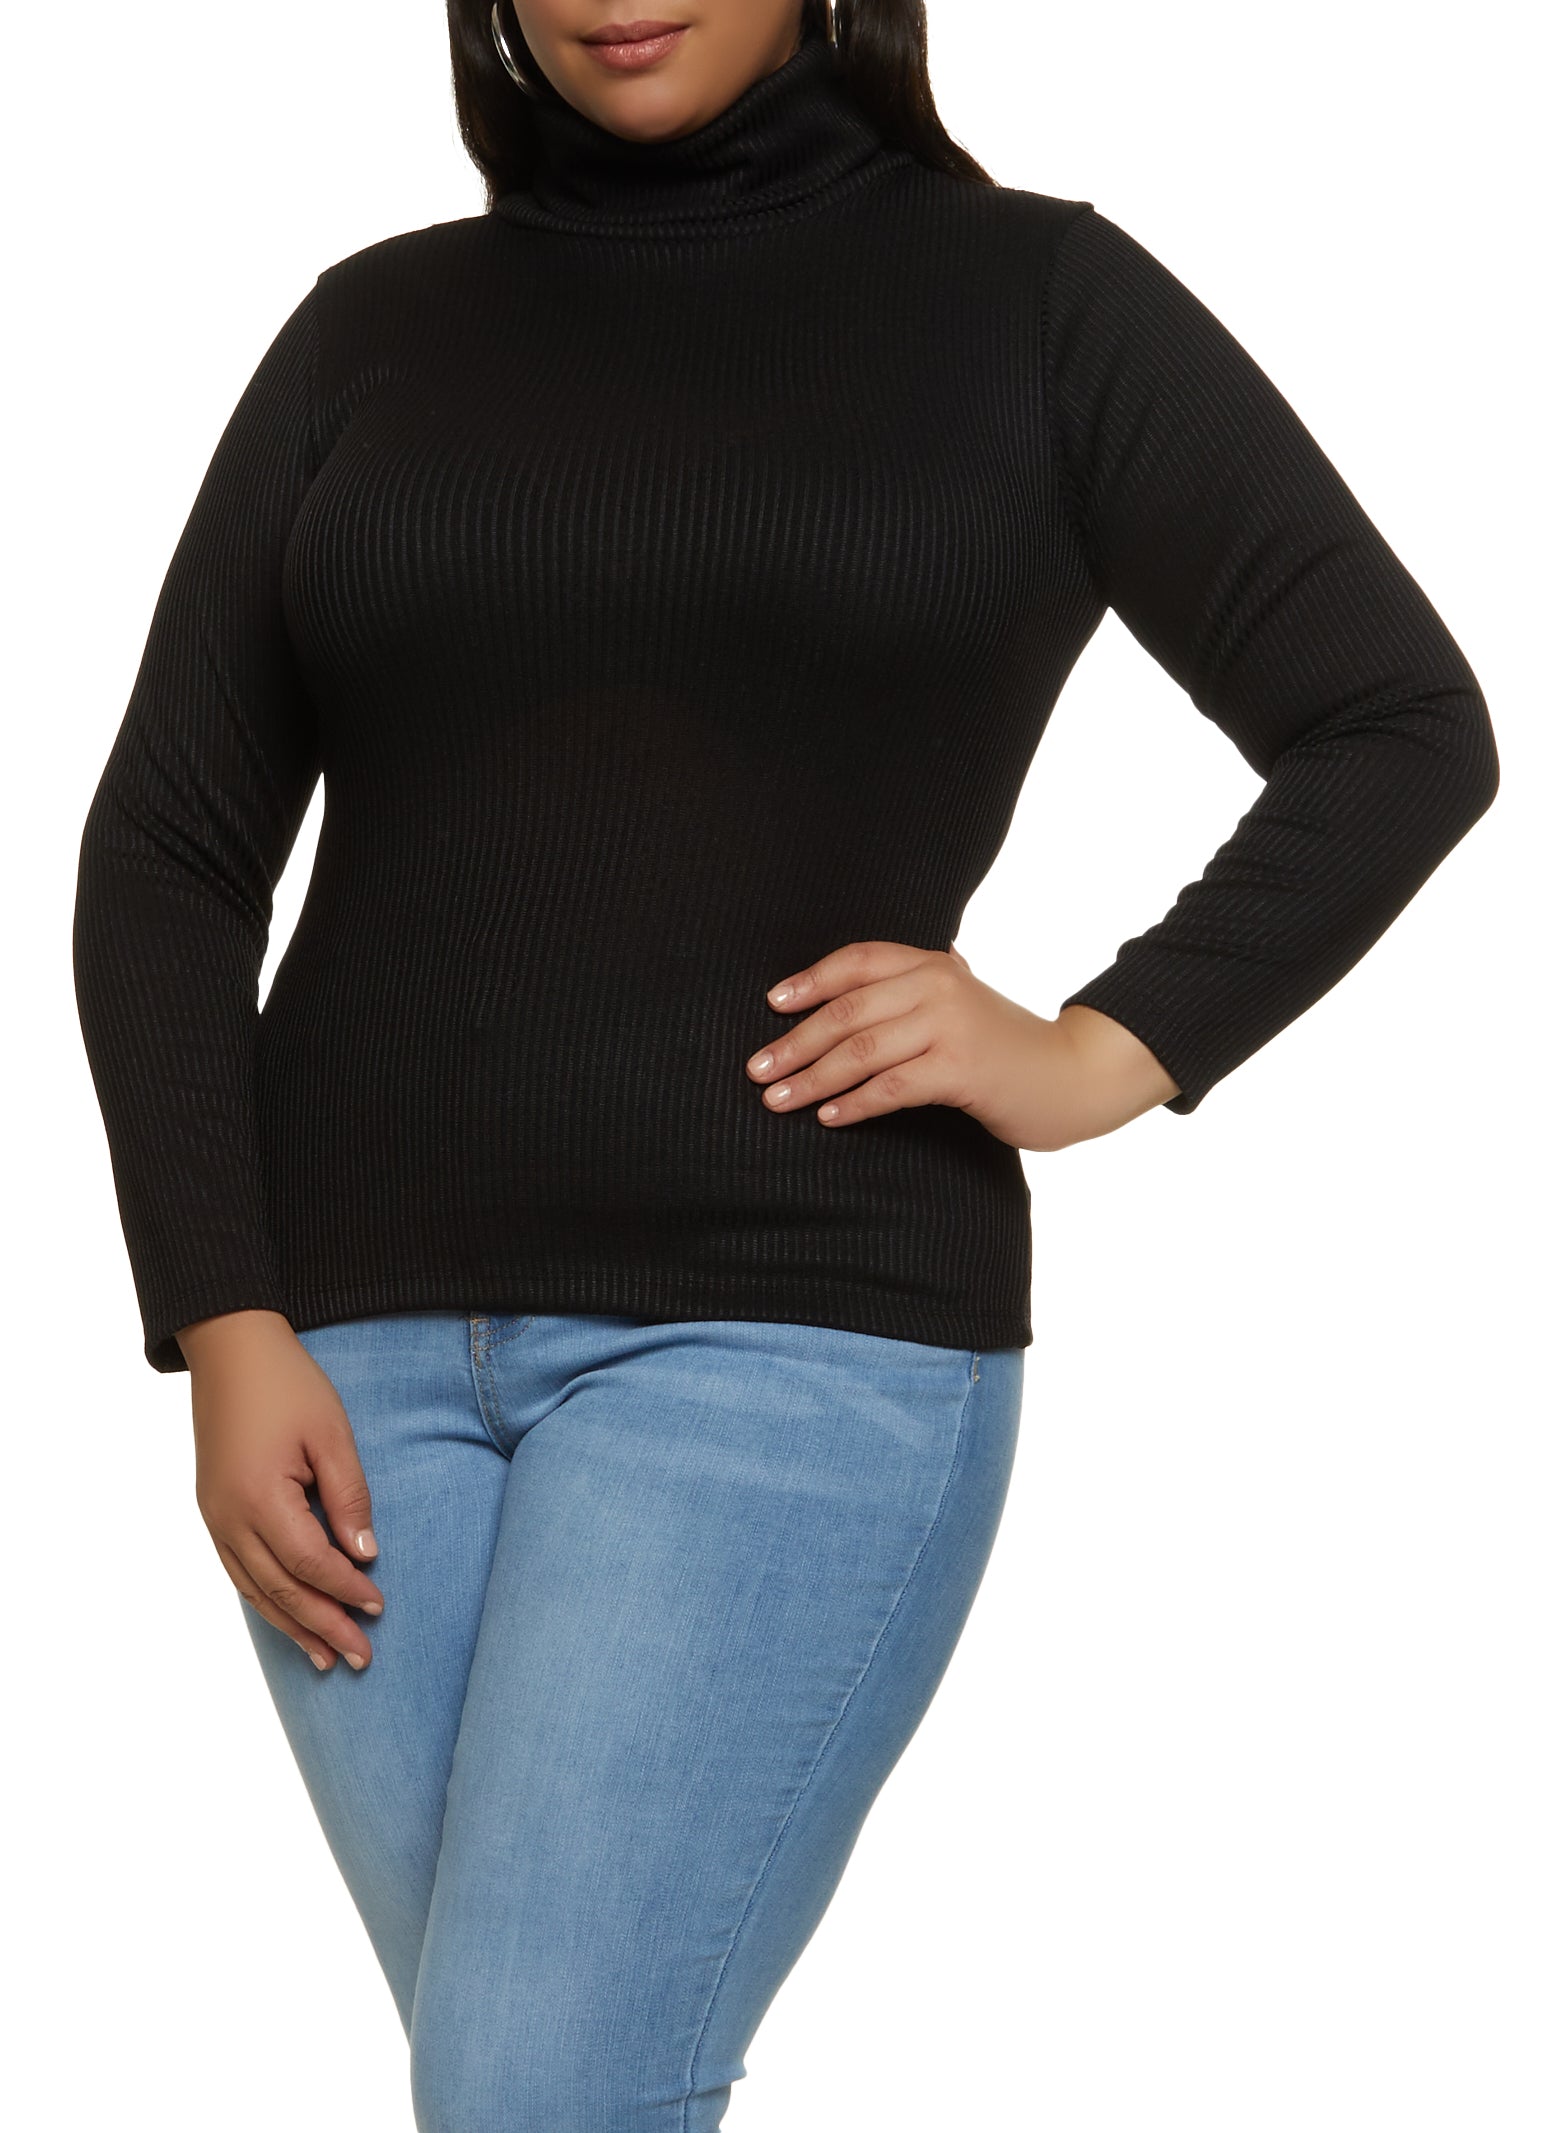 Replacement Belly Straps - Turtleneck, Inc